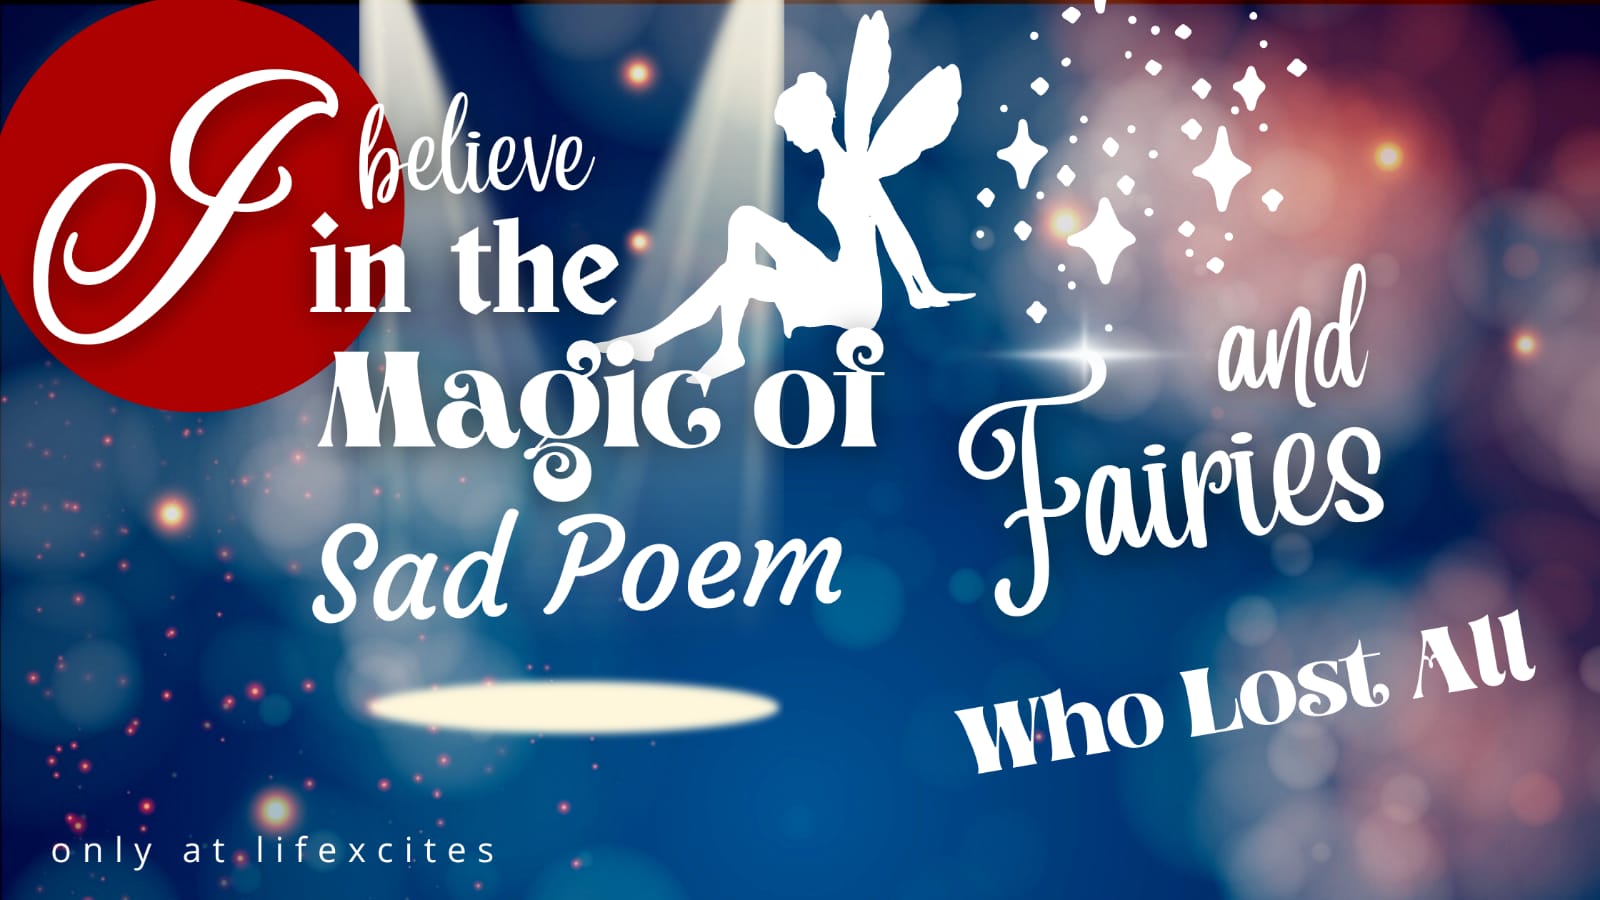 I Believe in the Magic of Sad Poem and Fairies Who Lost All